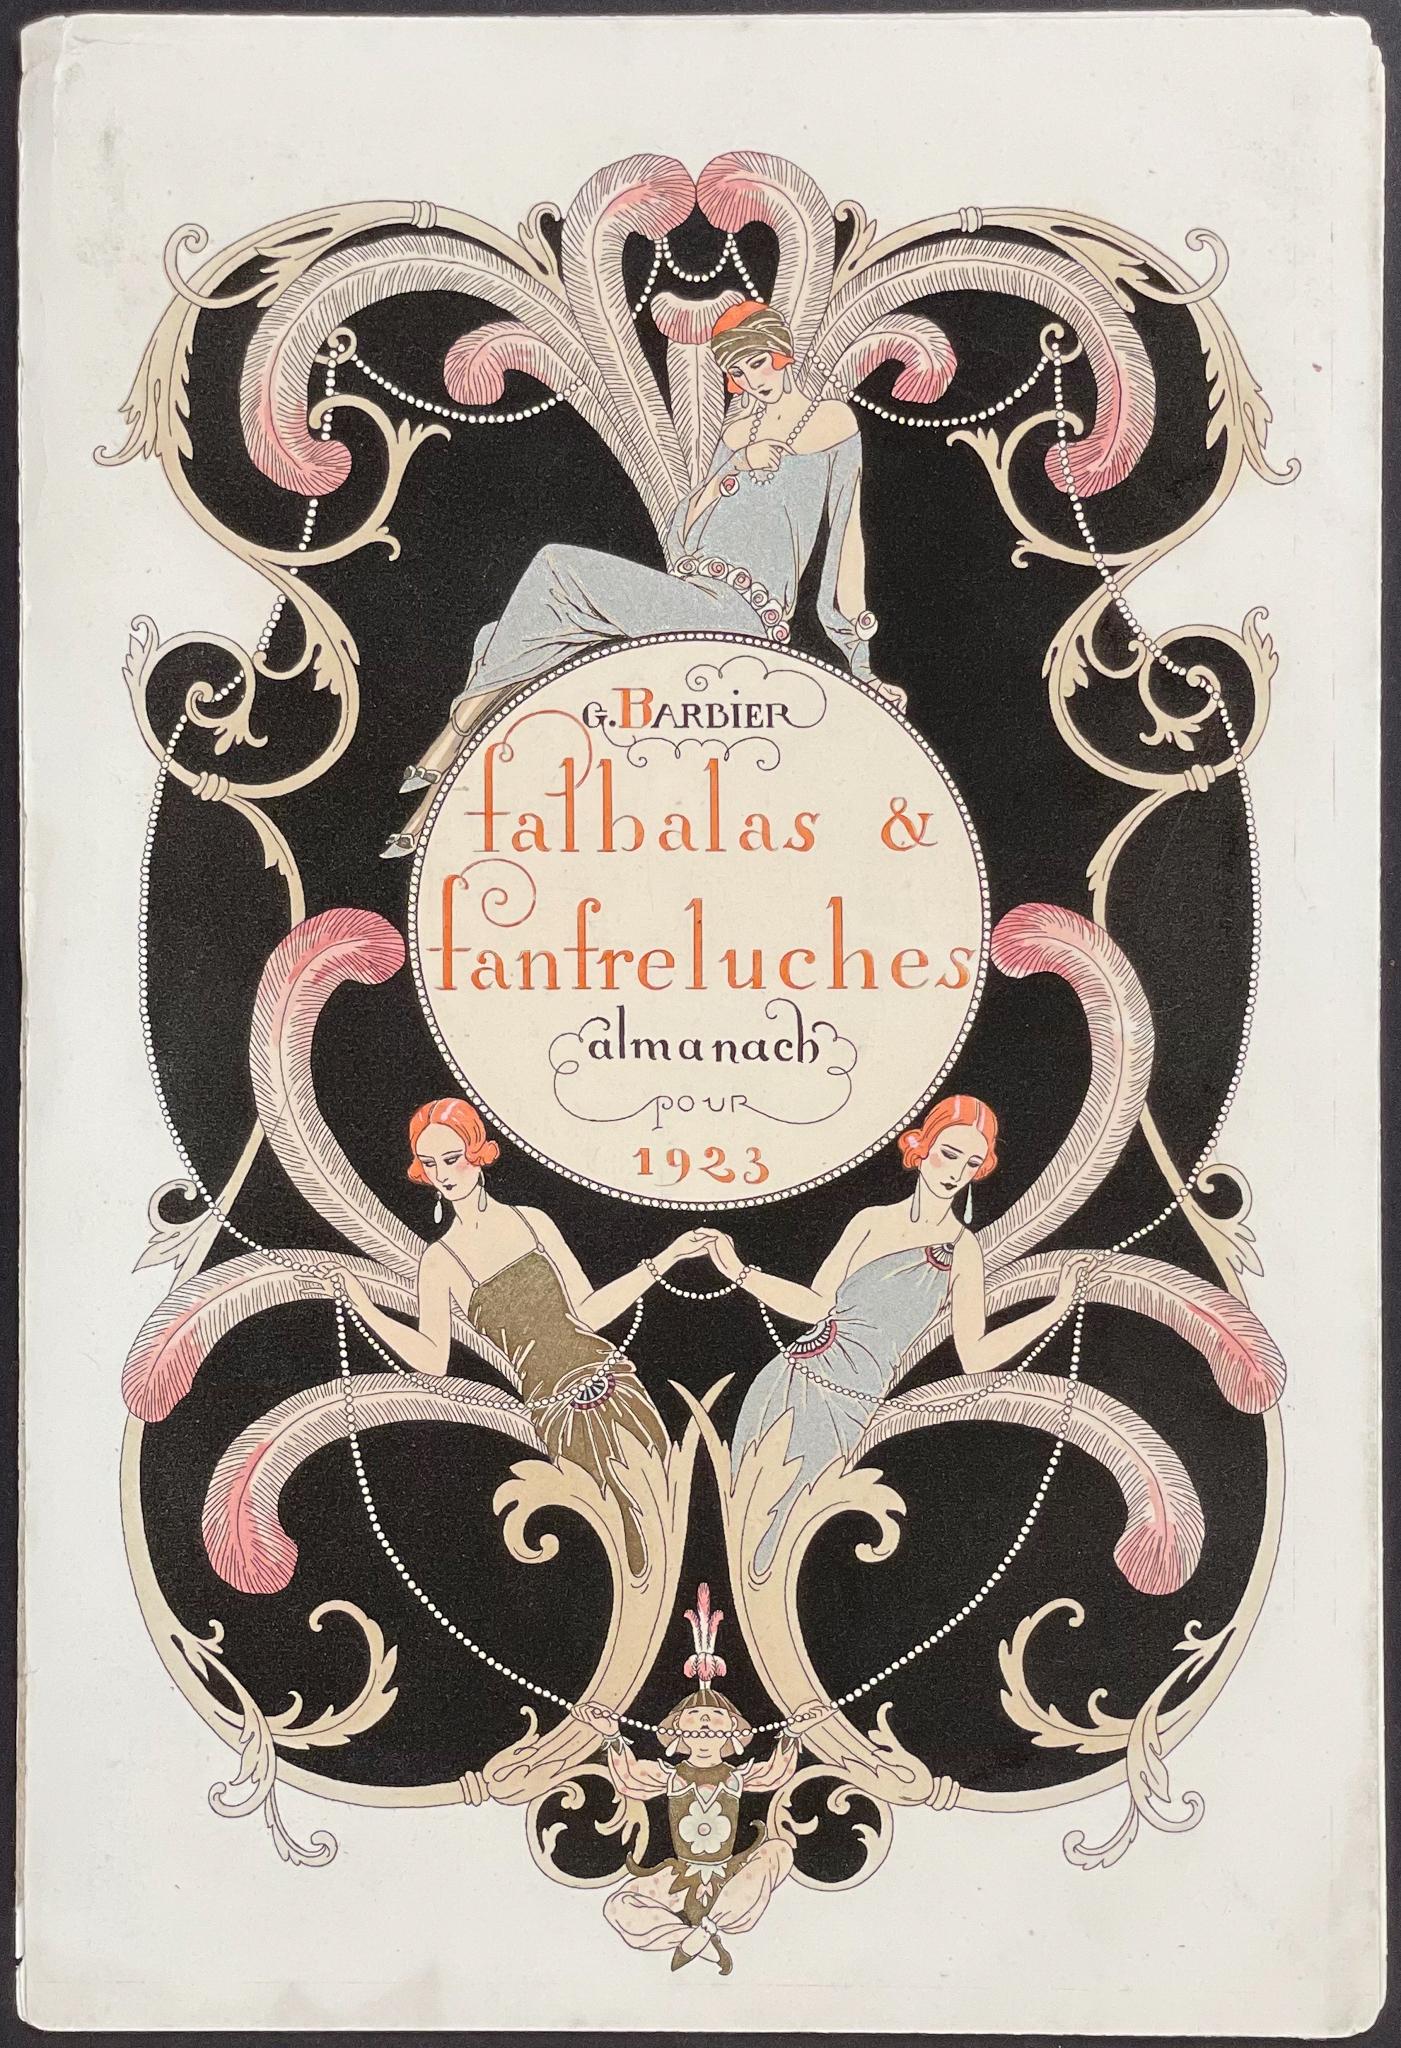 "Ornate Cover or Frontispiece" by Georges Barbier